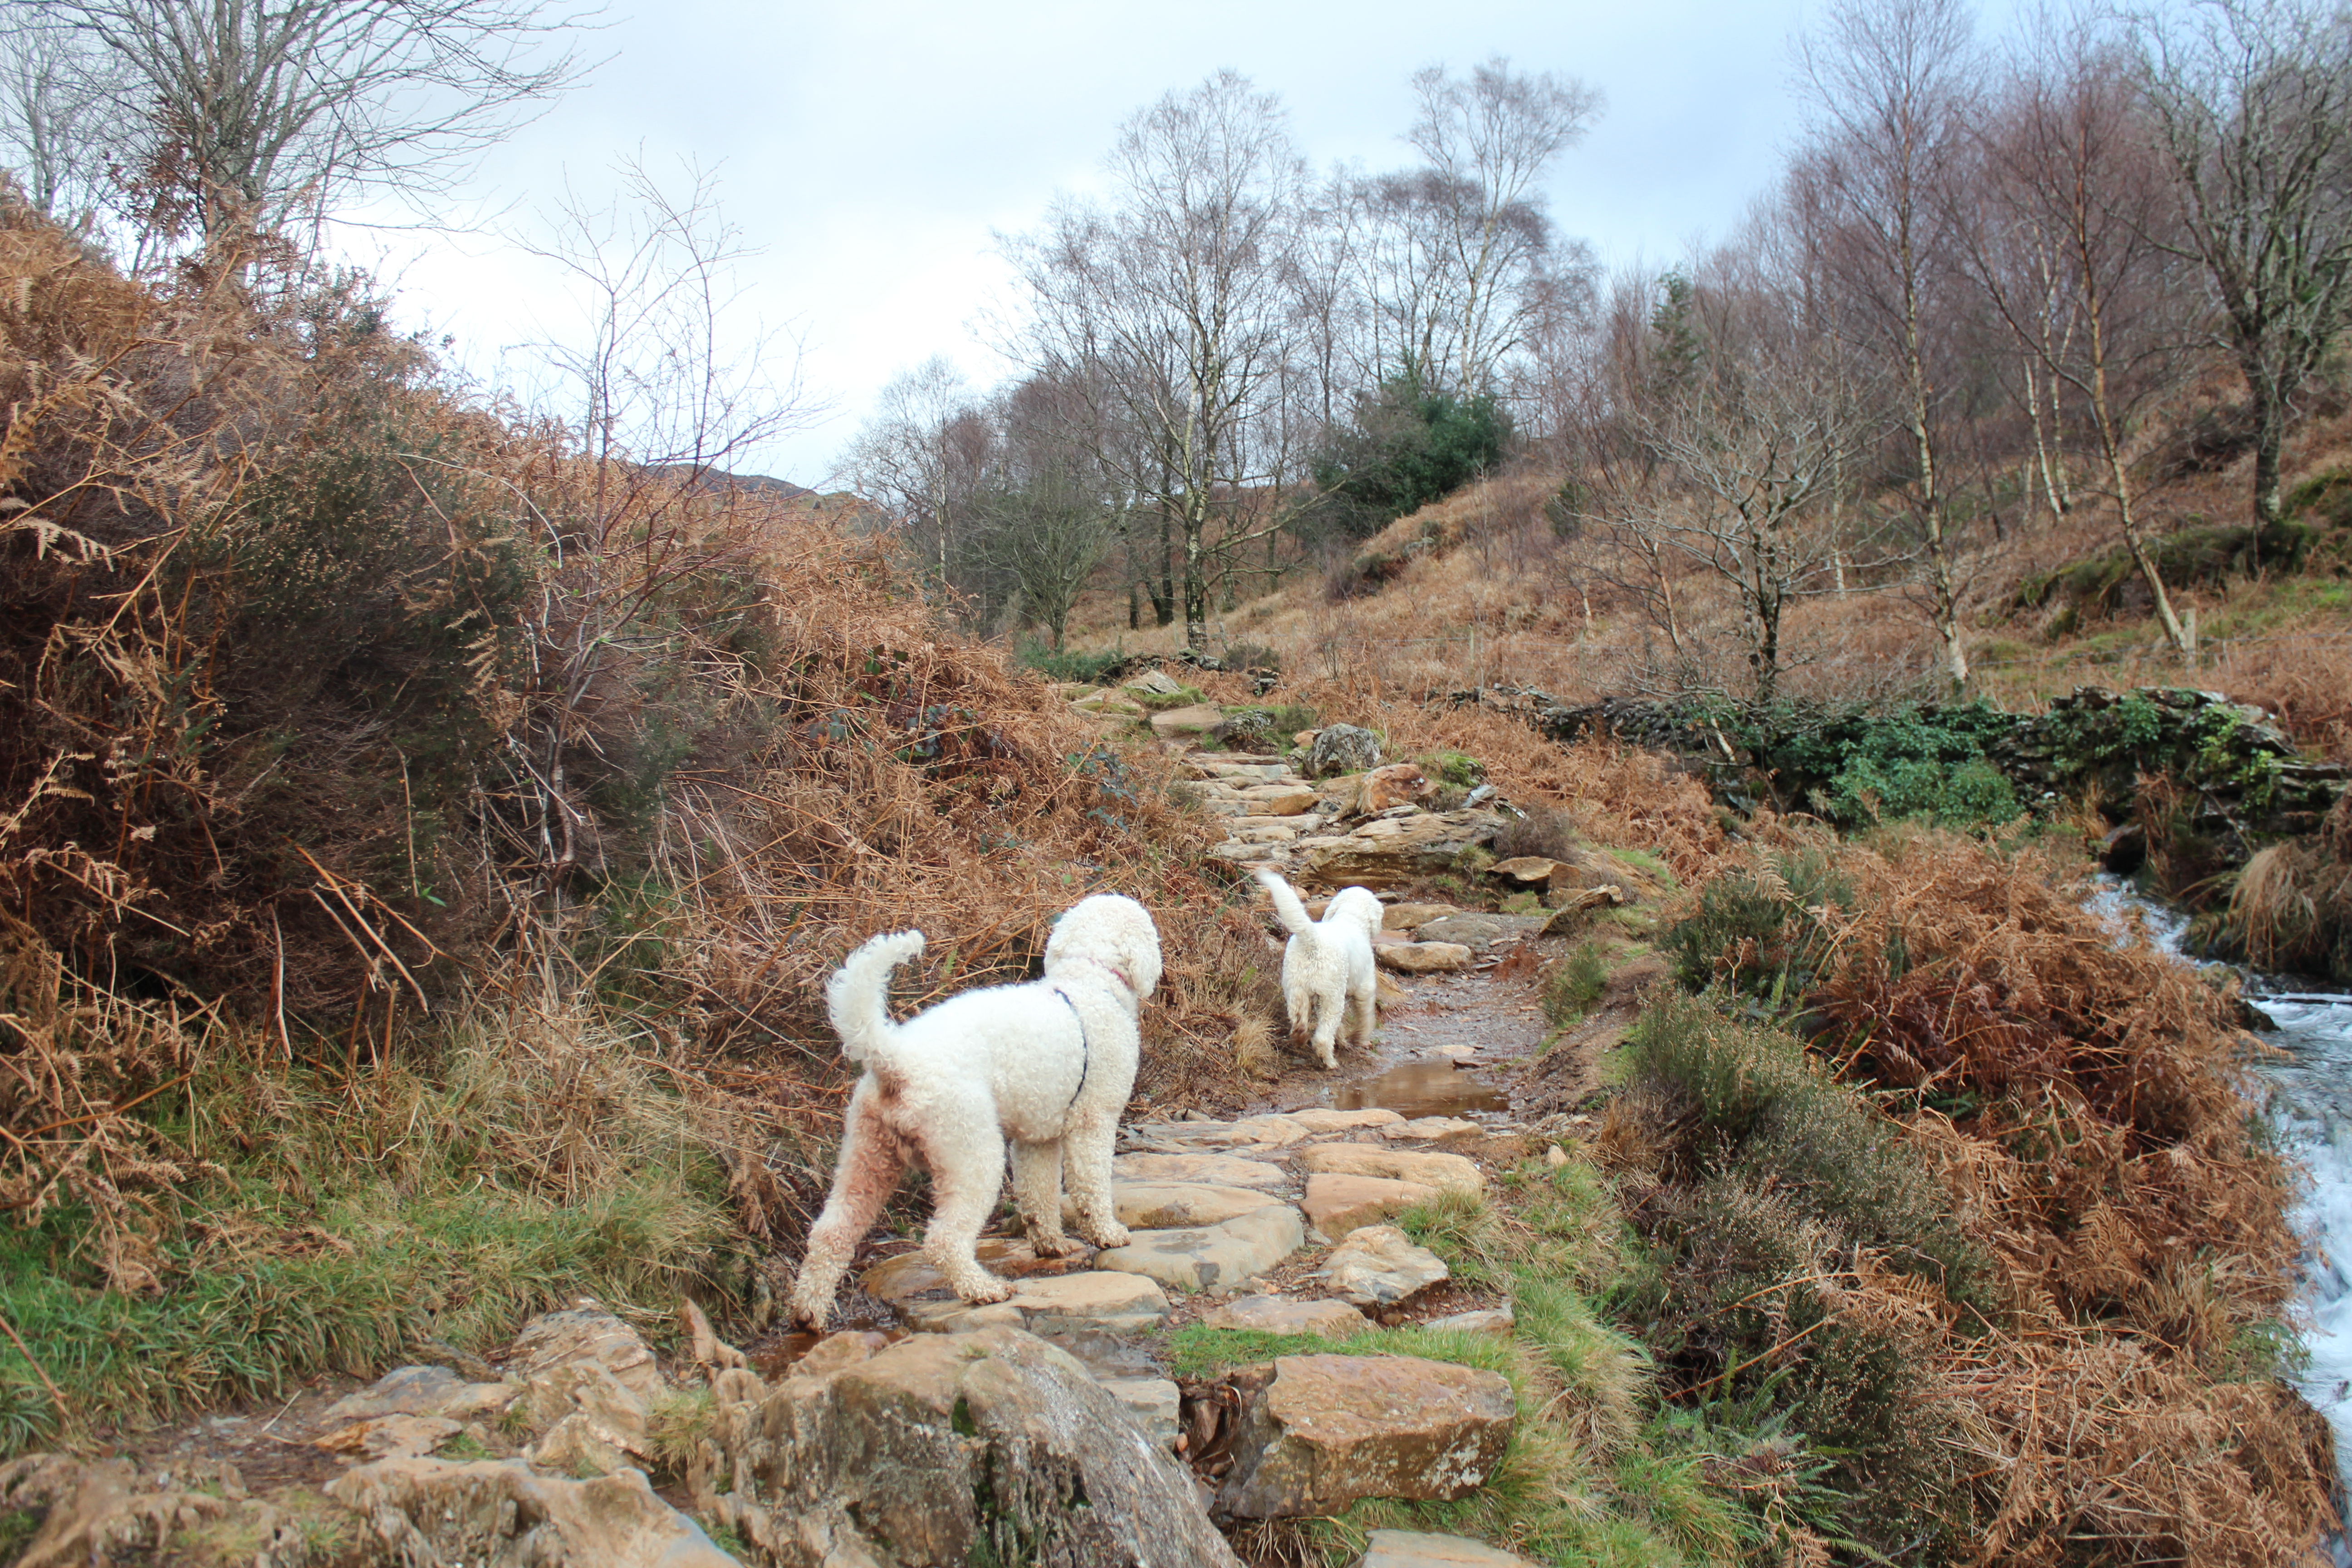 Dogs at Cwm Bychan